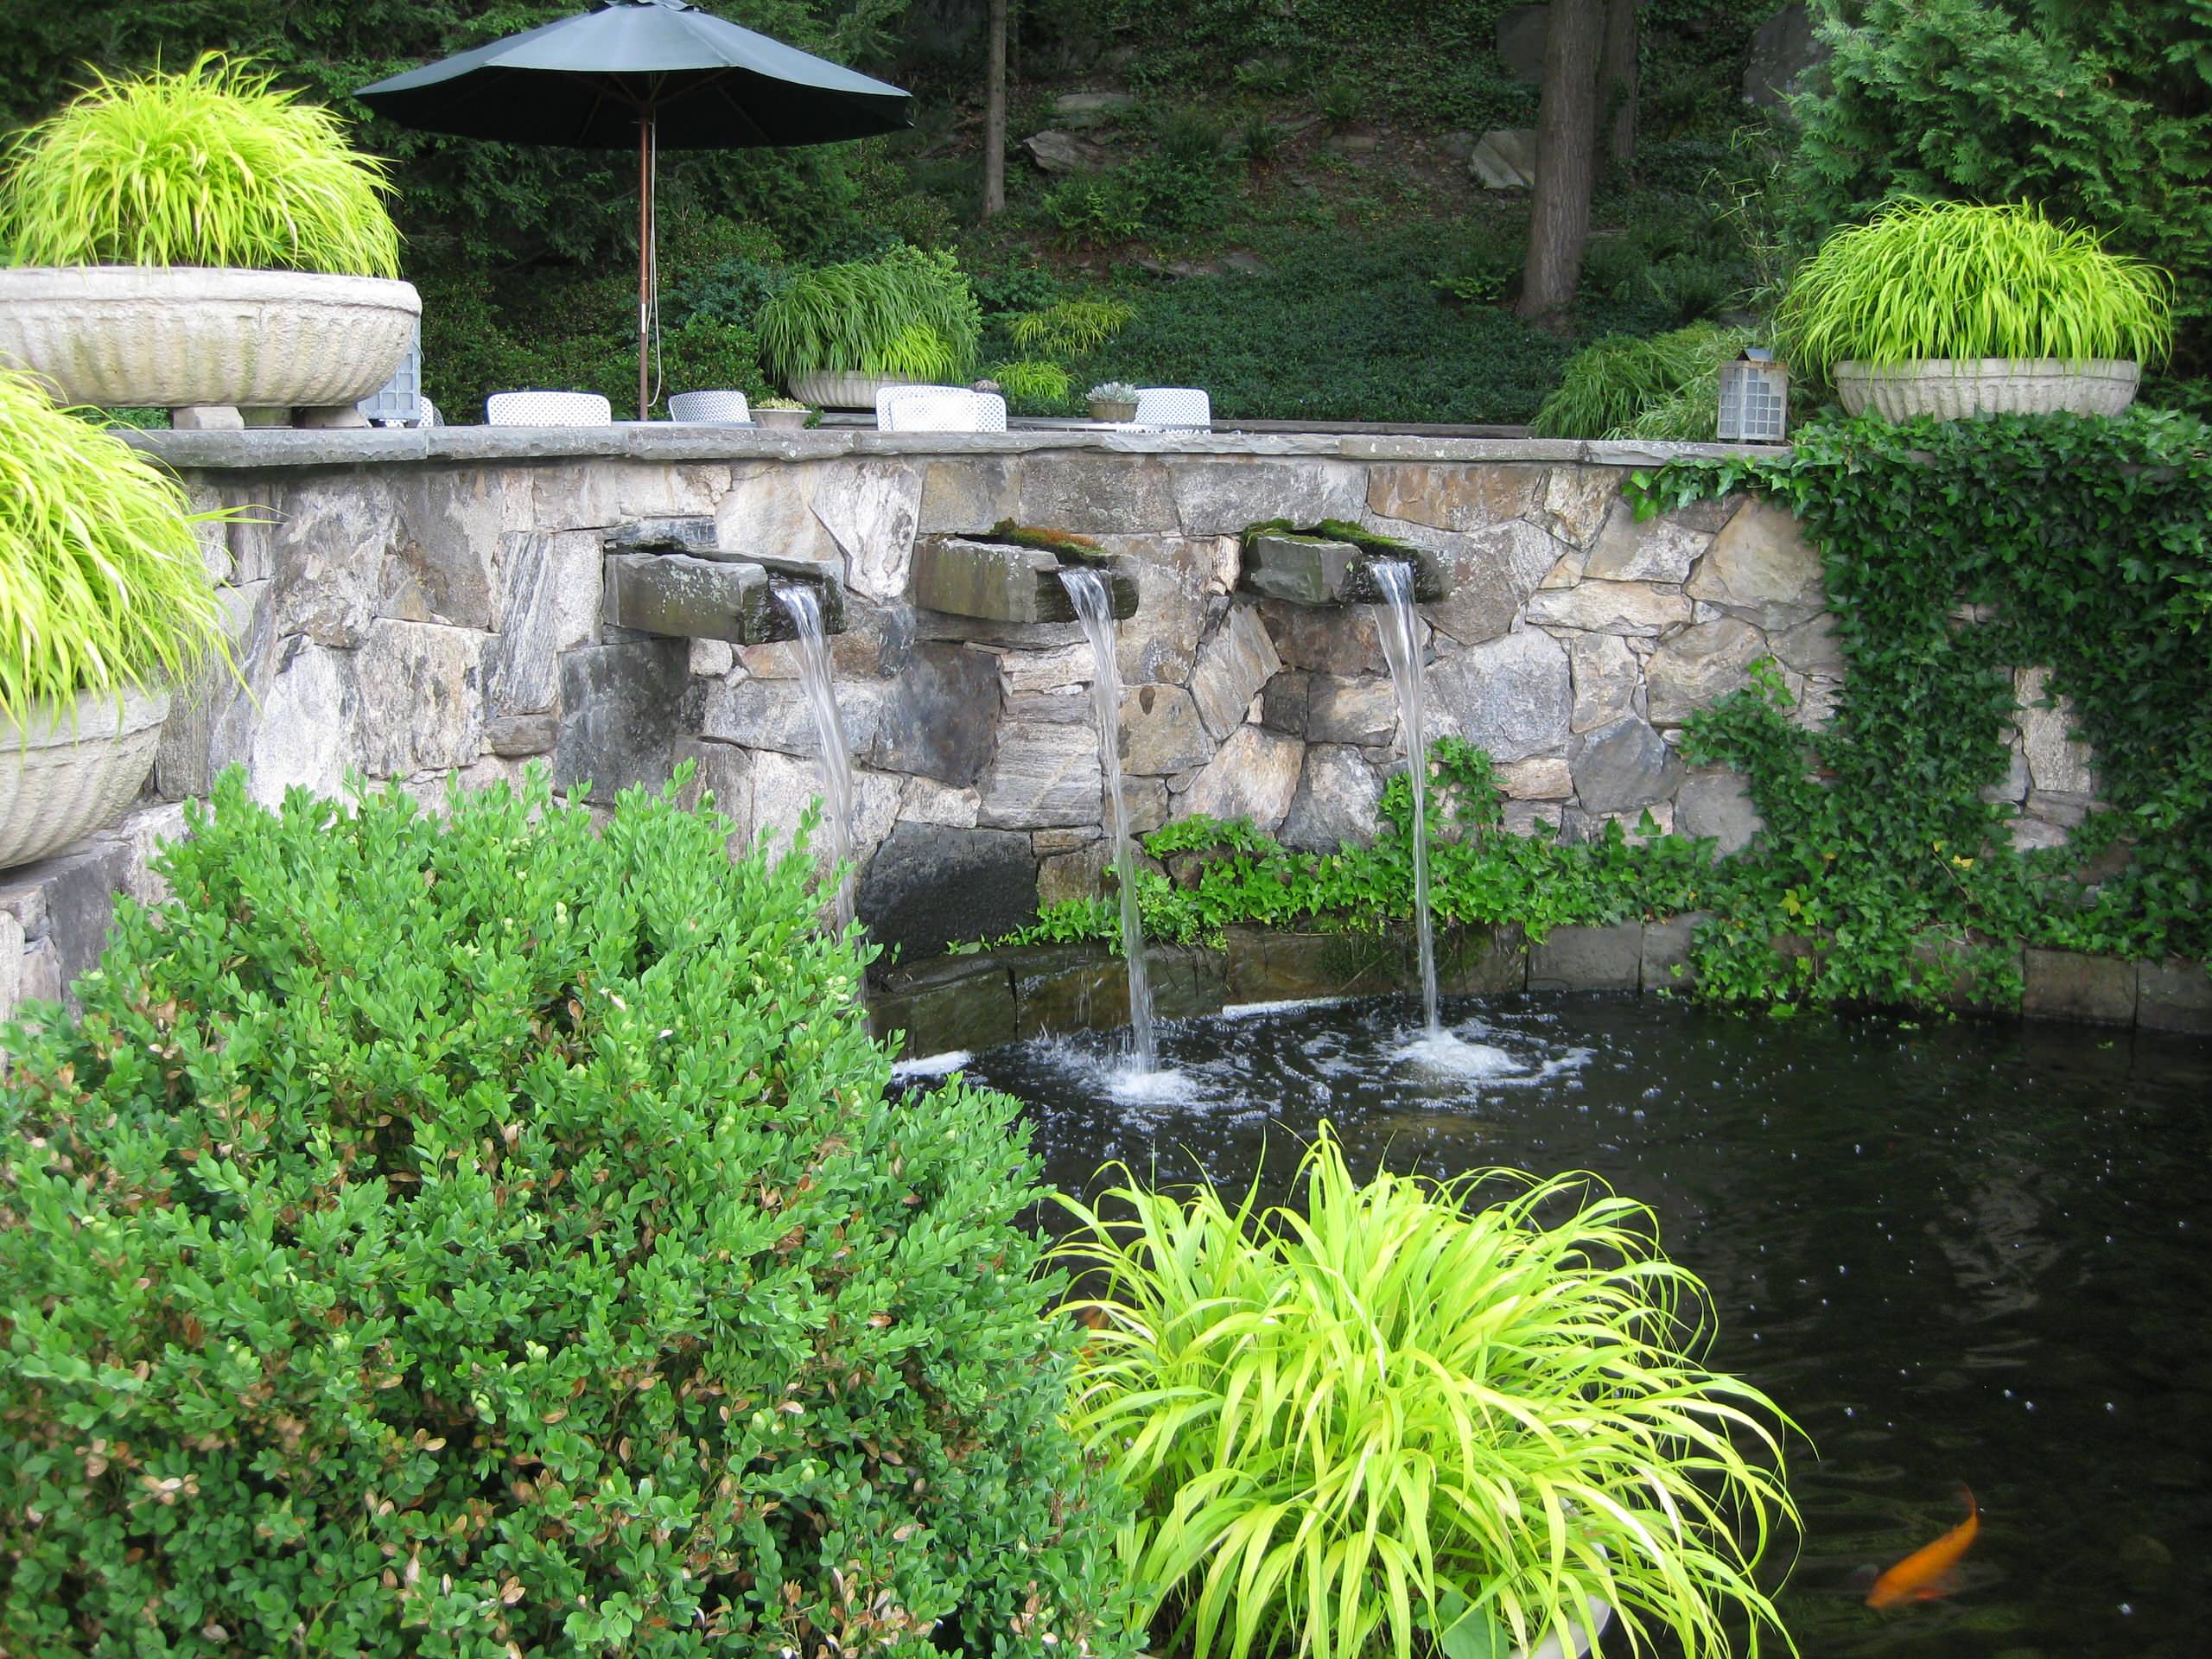 KOI POND WITH PATIO ABOVE. HAKENCLAWA GRASSES FILL THE POTS AT THE TERRACE. PETER ATKINS AND ASSOCIATES, LLC